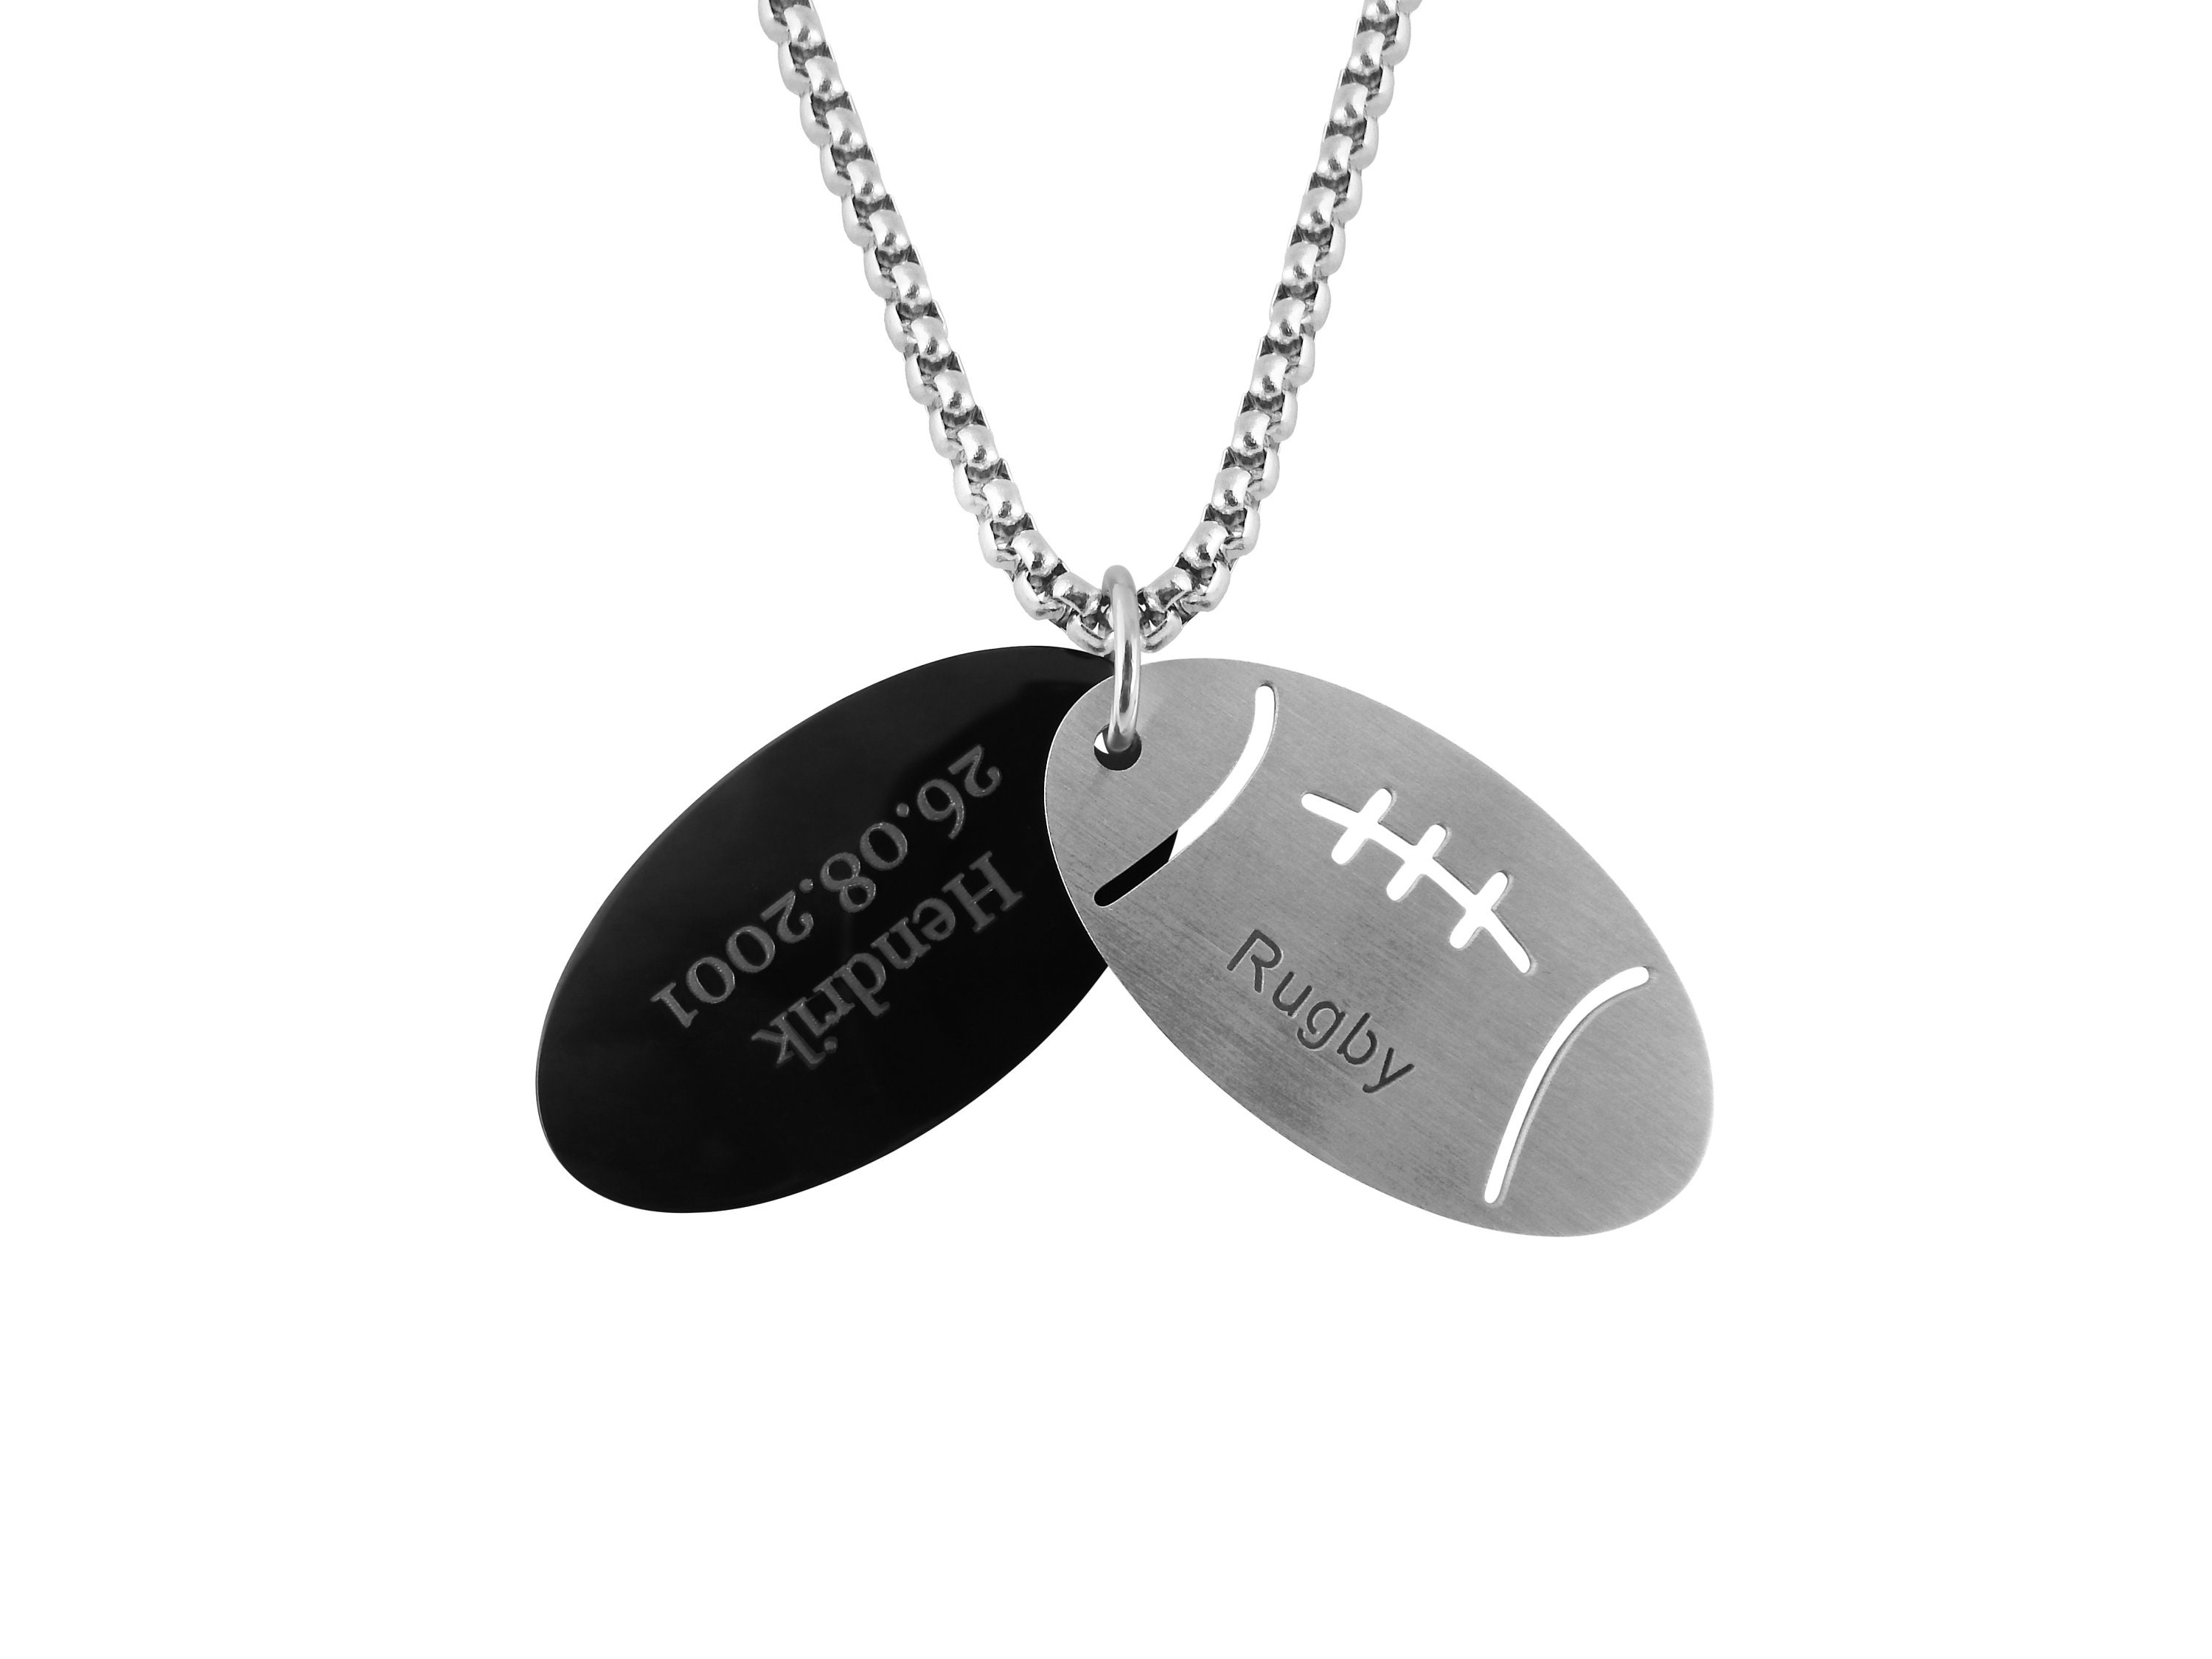 Personalized Football Necklace, Son Necklace, Sports Team Jewelry, Gift for  Son, Aluminum Jewelry - Etsy